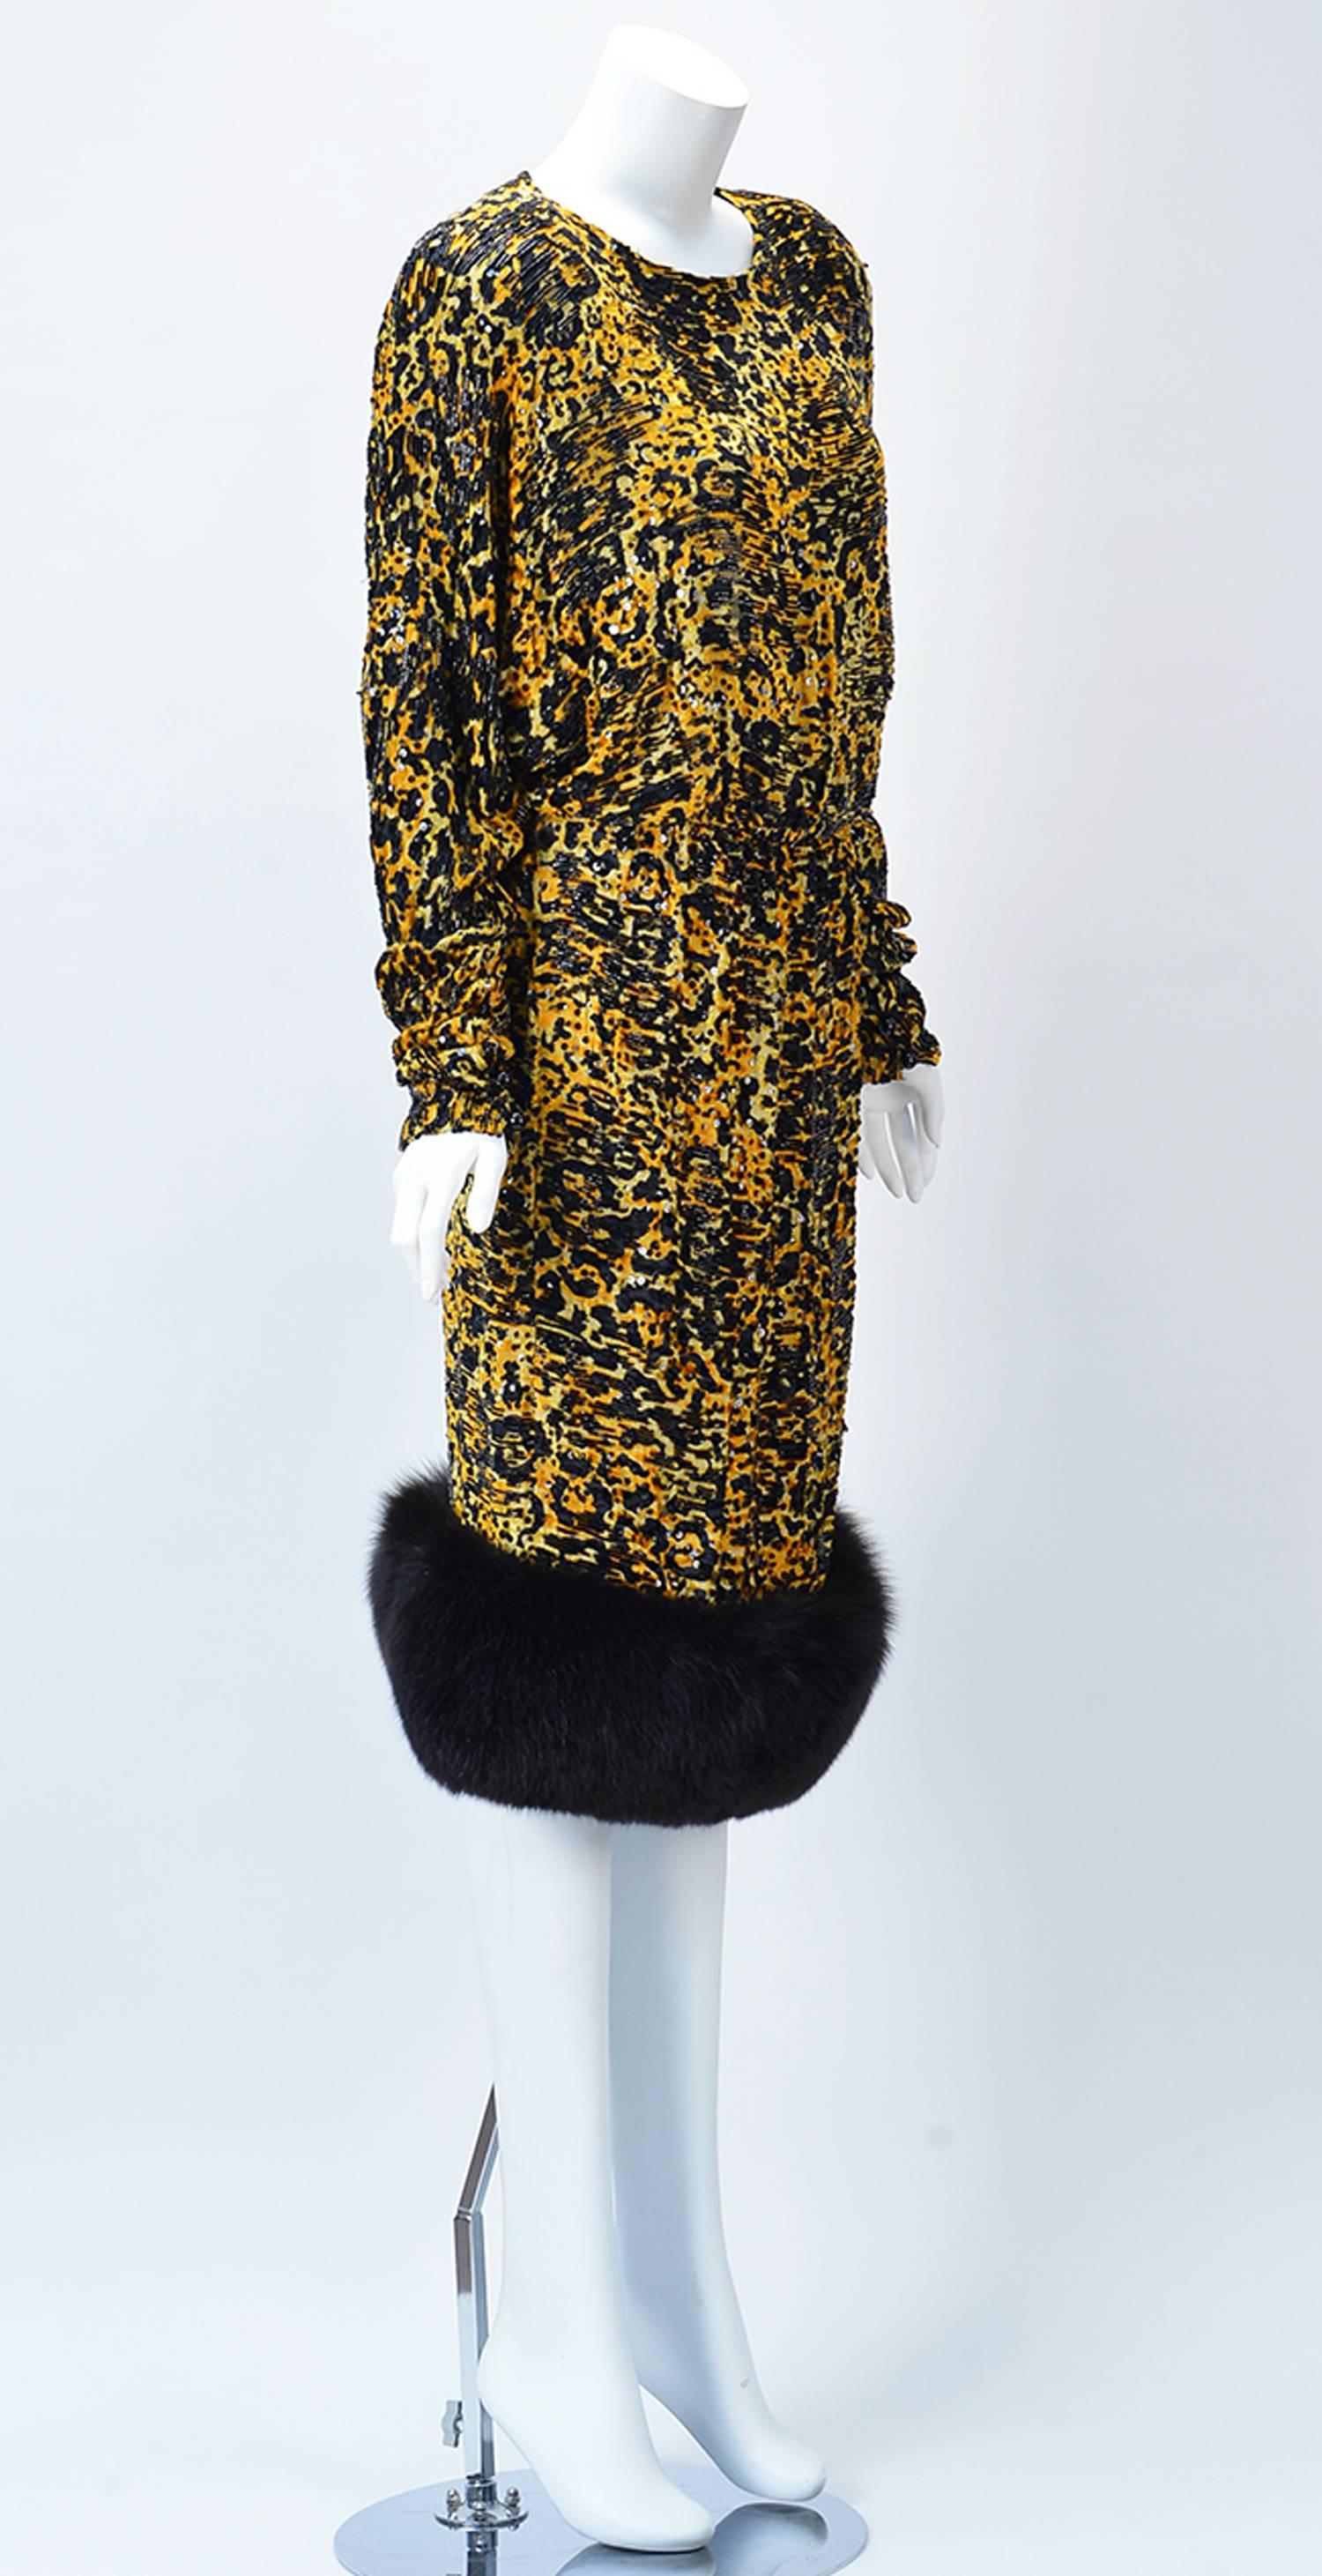 Bodacious 1980's yellow and black leopard silk burn out or Devore dress with Mink  hem by Bill Blass for Neiman Marcus. Thoughtfully embellished with black sequins and beading. Batwing type sleeves button at cuff. Five large black round buttons at